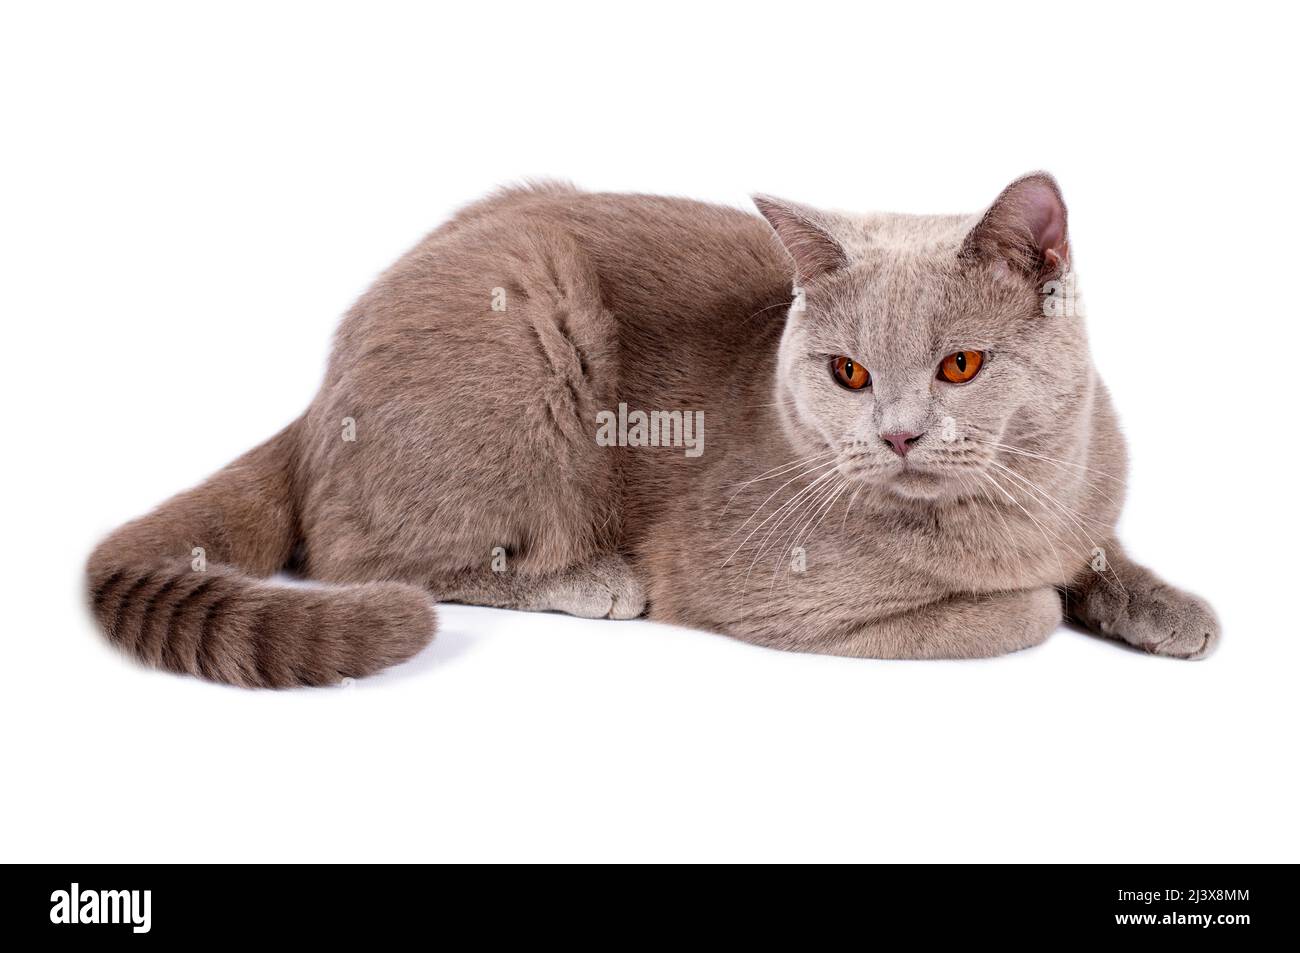 perfect scottish cat with orange eyes lying on a white background, isolated image, beautiful domestic cats, cats in the house, pets Stock Photo